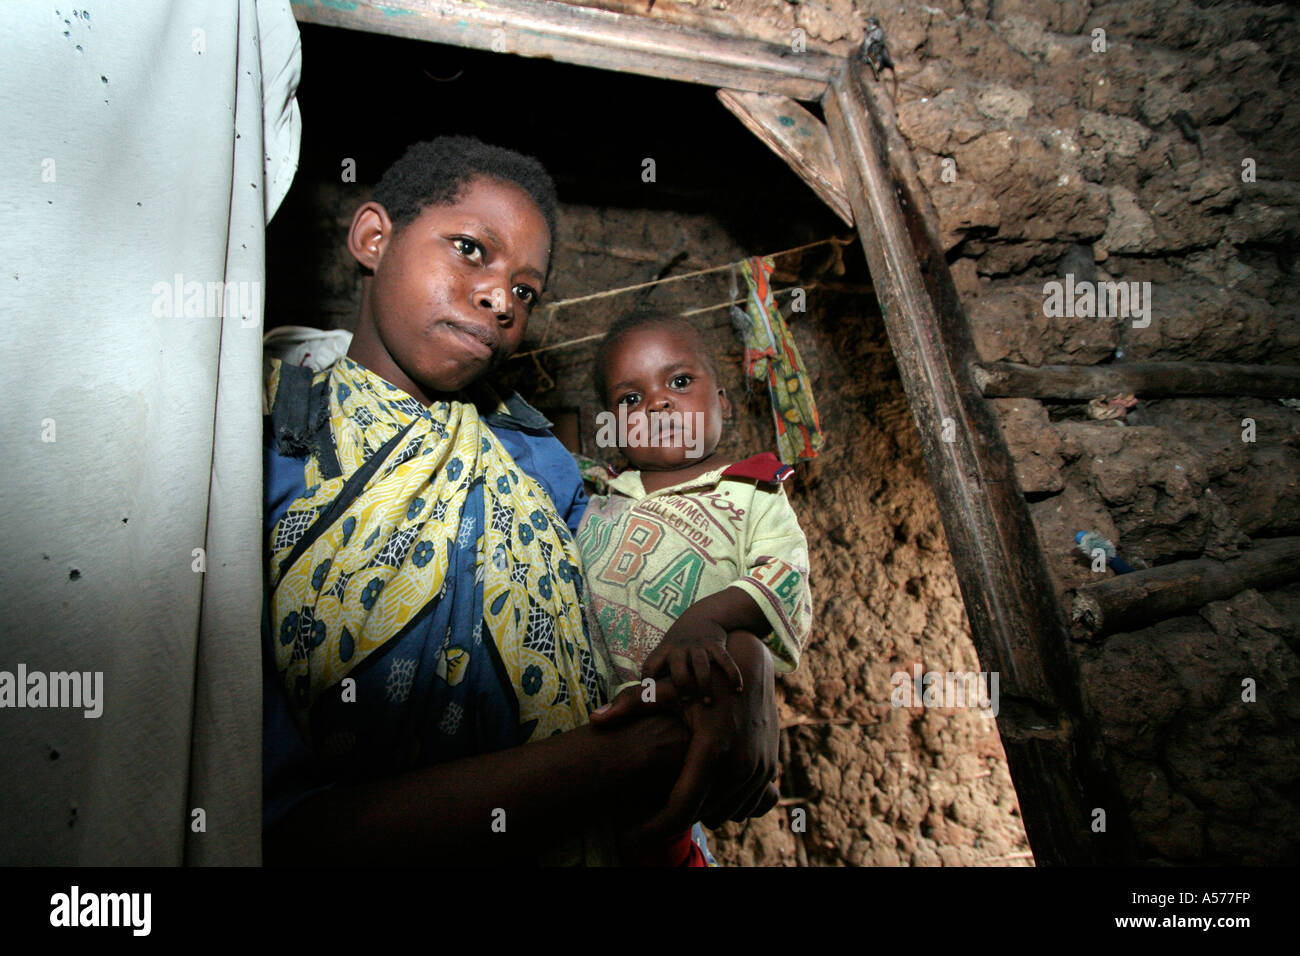 Painet jb1371 kenya young mother child kid mombasa africa children kids country developing nation less economically Stock Photo